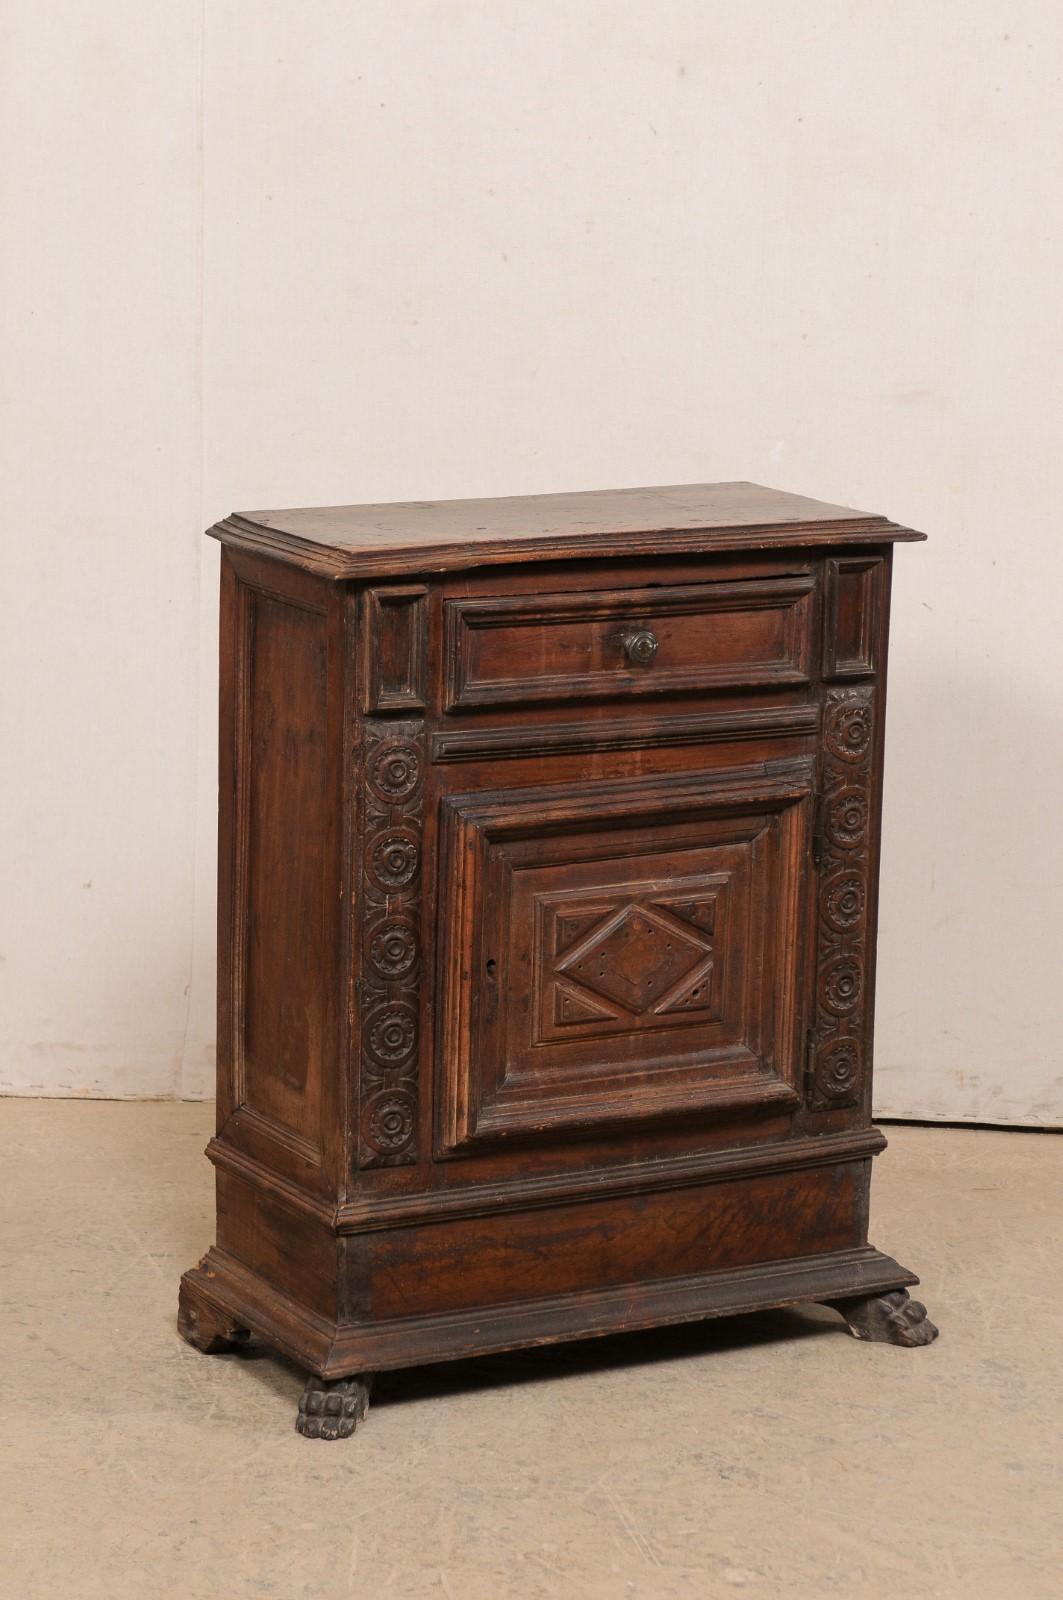 A Italian smaller-sized carved walnut commode, with single drawer and door, from the turn of the 17th to 18th century. This antique cabinet from Italy has has a rectangular-shaped top, with graduated step down edges, which rests atop a nicely carved